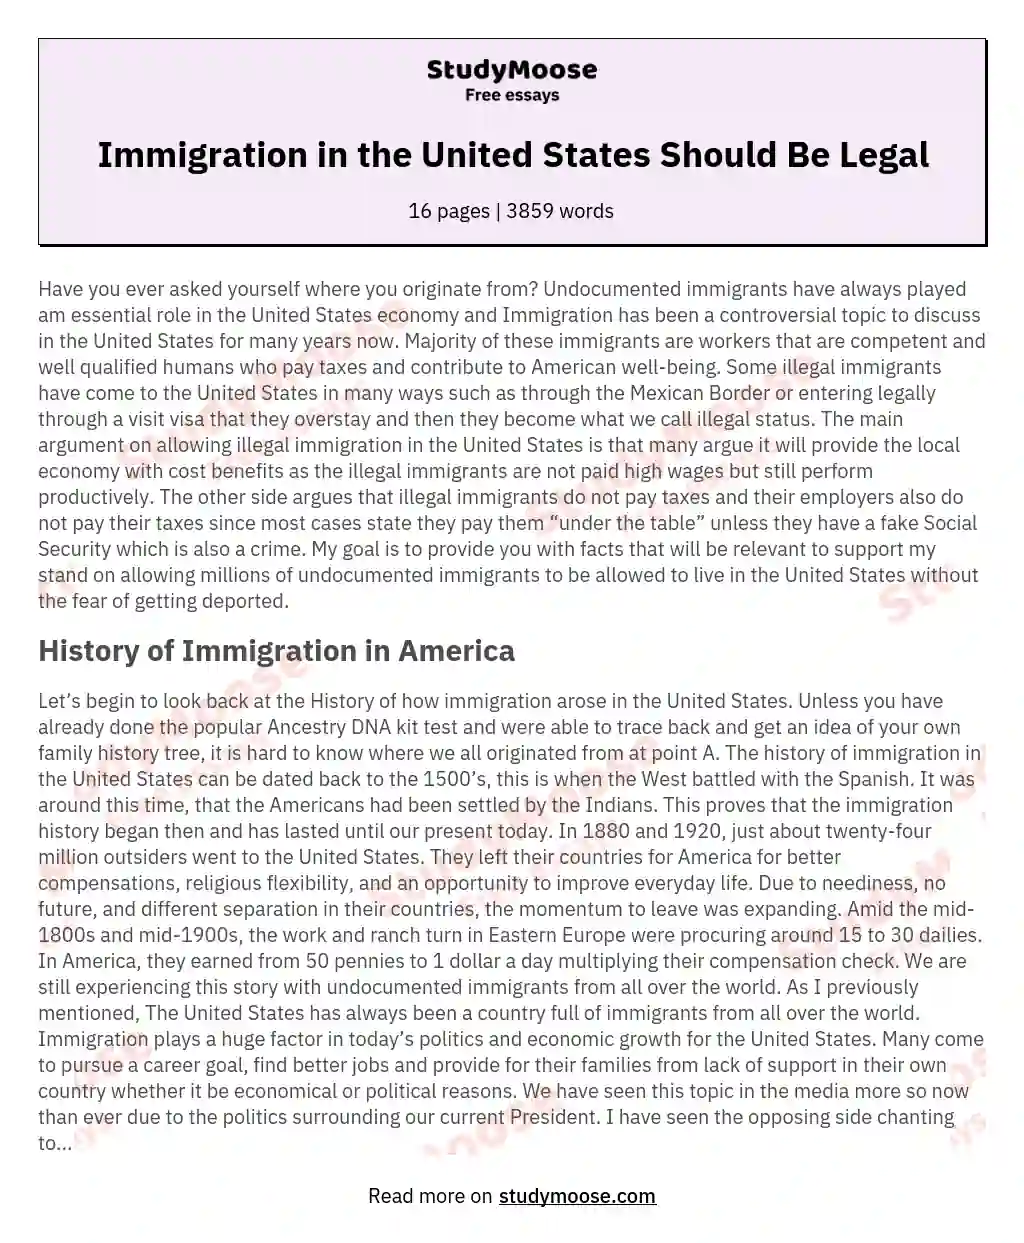 Immigration in the United States Should Be Legal essay